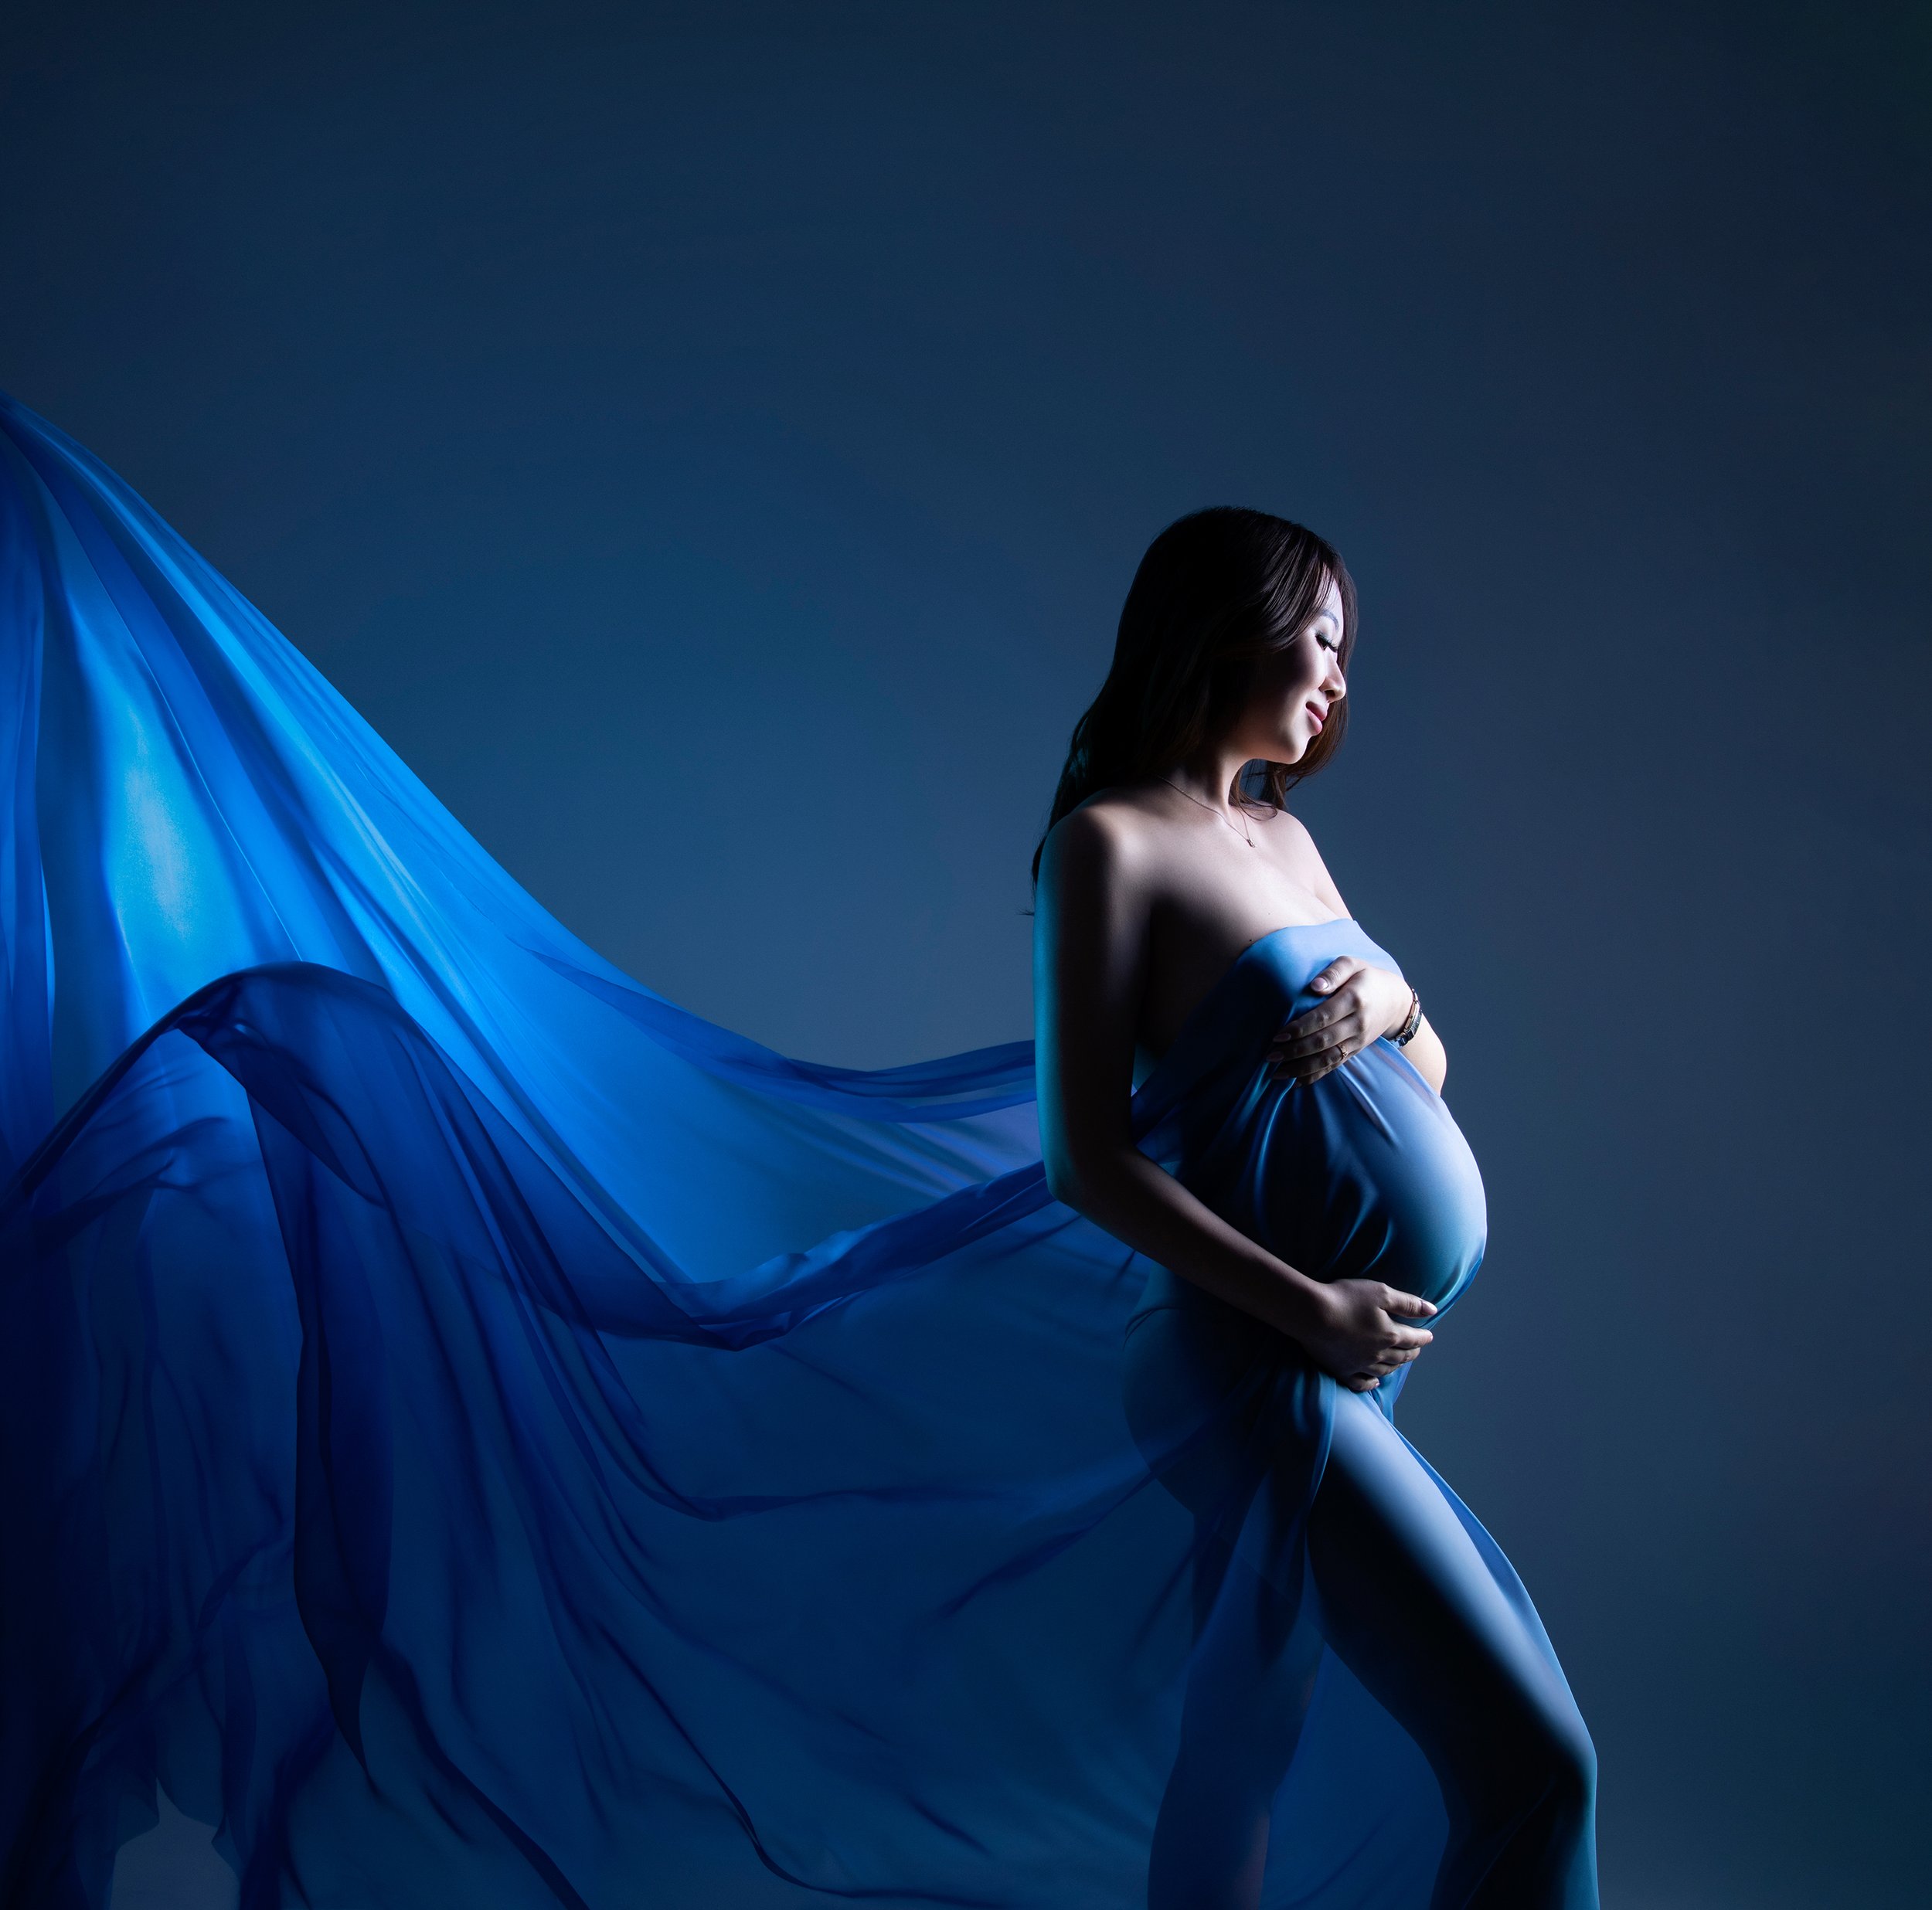 Maternity-photography-with-flowing-fabrics.jpg